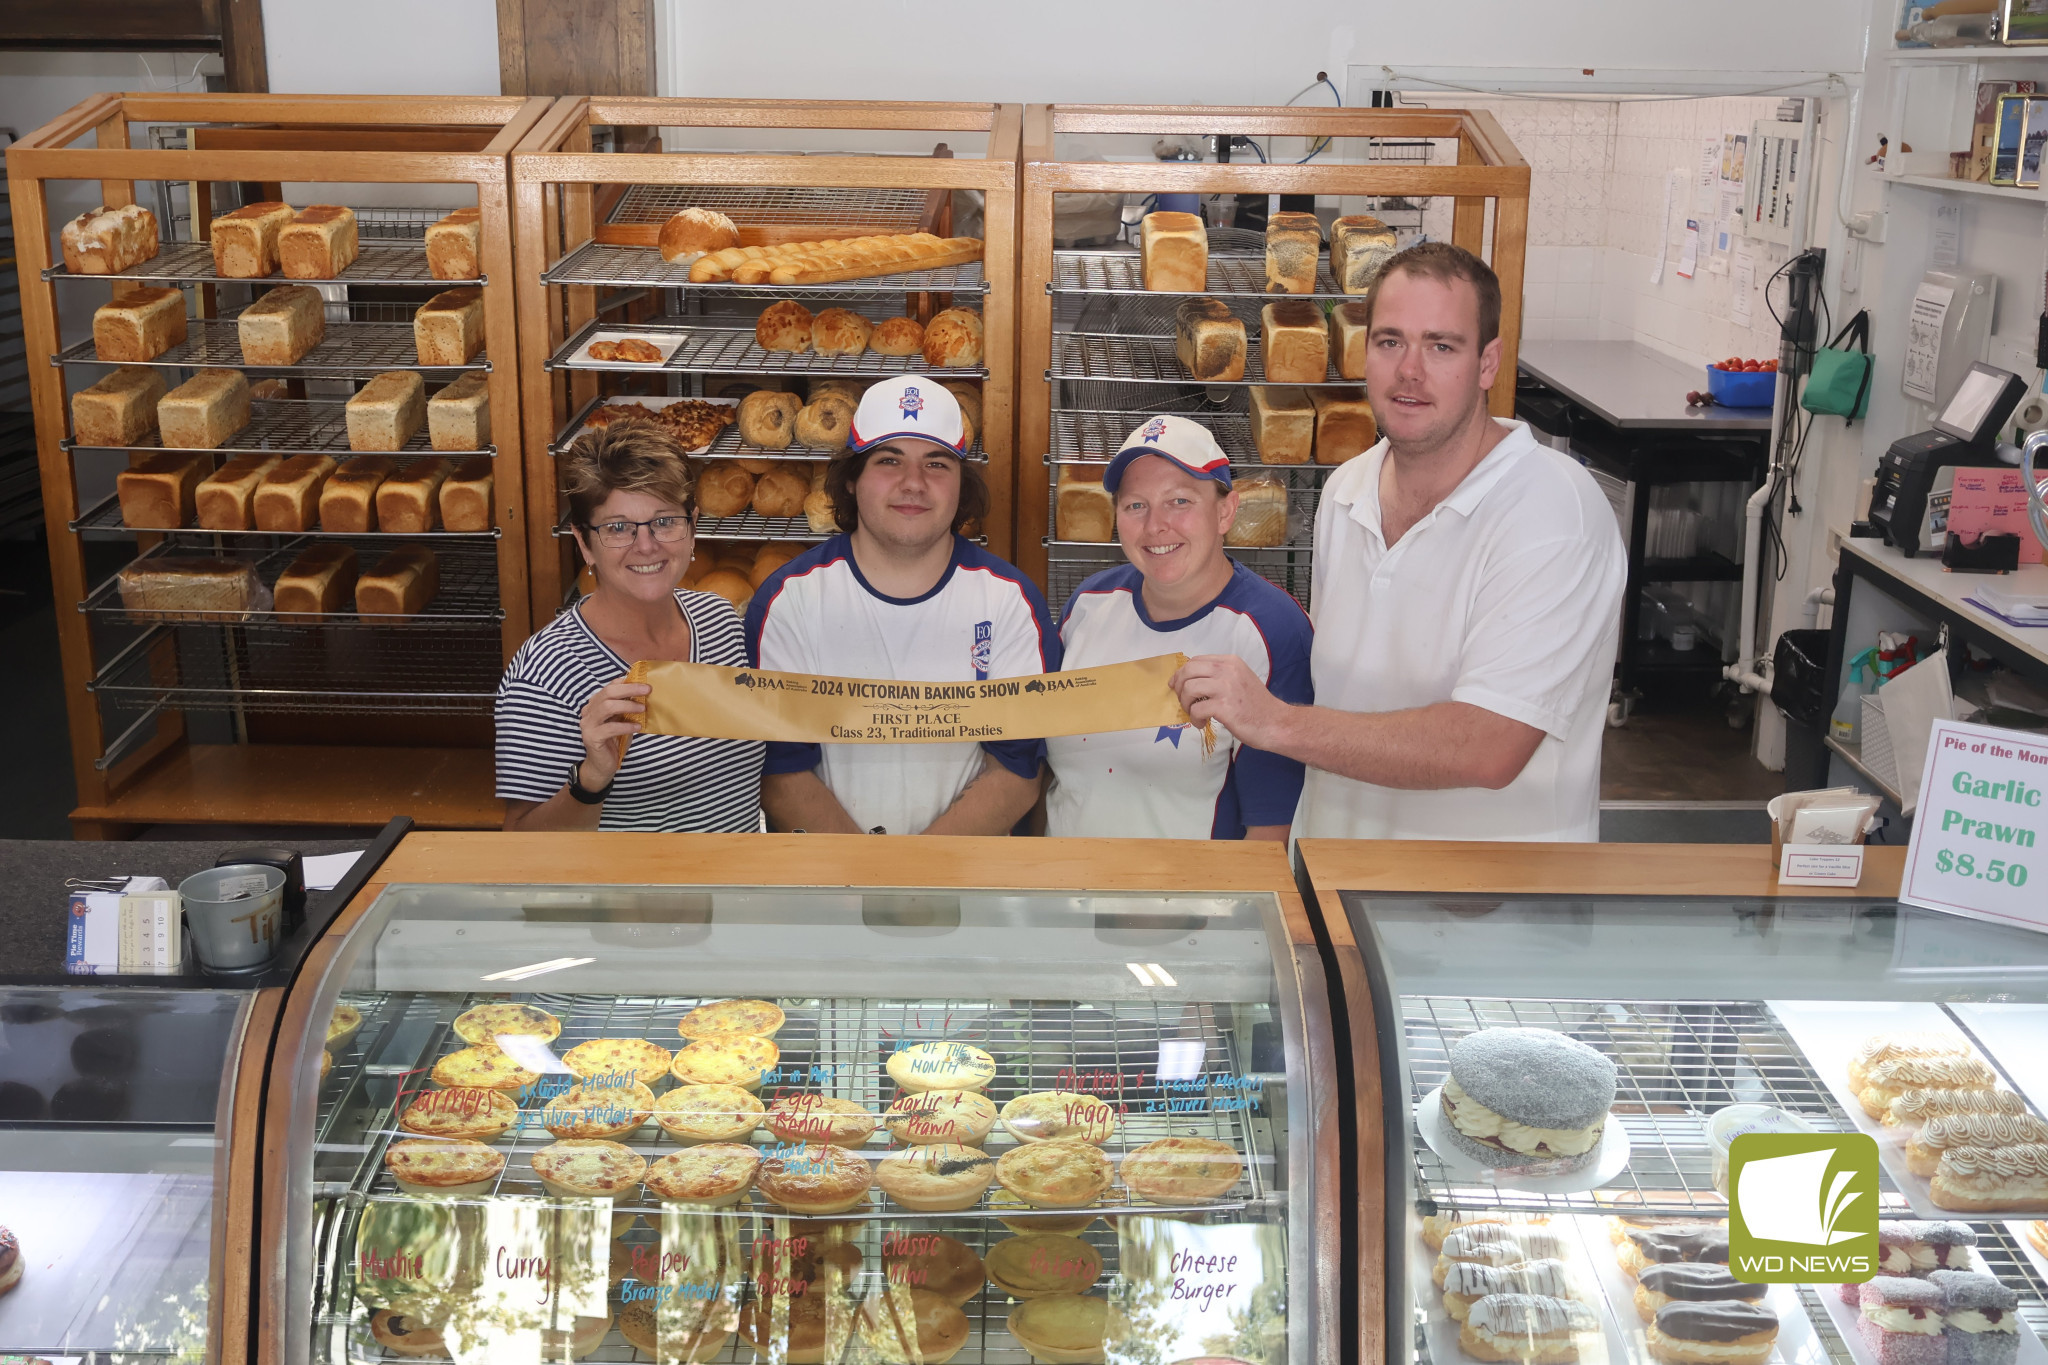 It’s official: Terang Country Bakery owners Gaye McVilly (left) and Brad Burkitt (right), pictured with apprentice Jake Proctor and Kelly McIntosh, are celebrating after the bakery was crowned as having the best traditional pasties at the 2024 Victorian Baking Show.